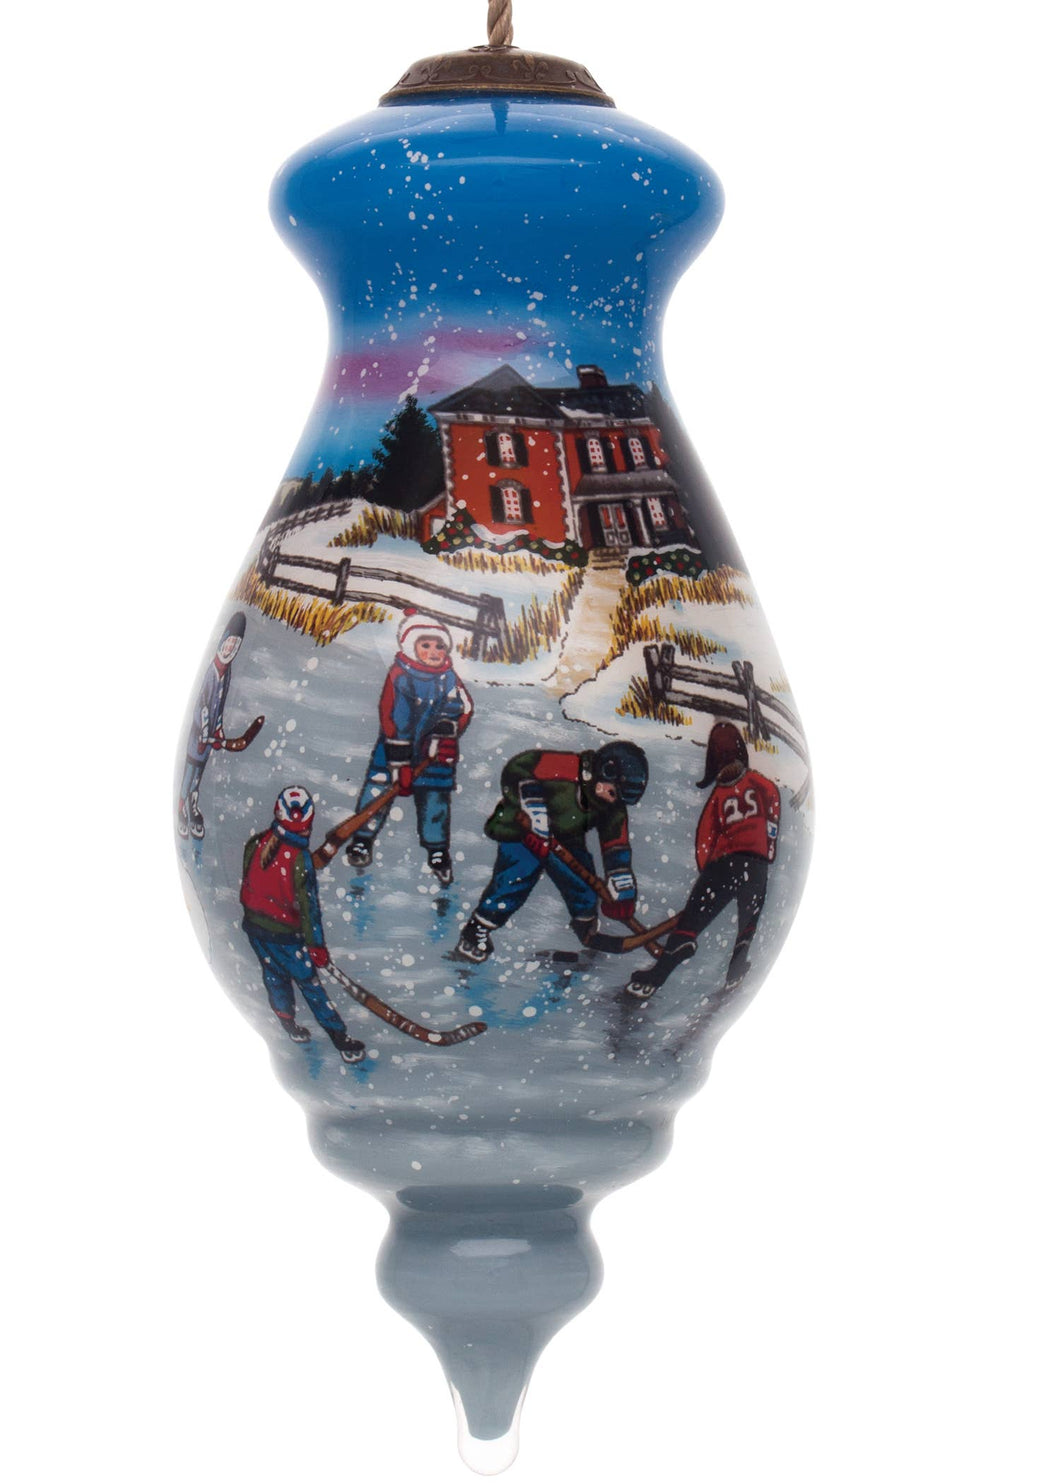 A Country Christmas Pond Hockey Glass Christmas Ornament - Hand Painted